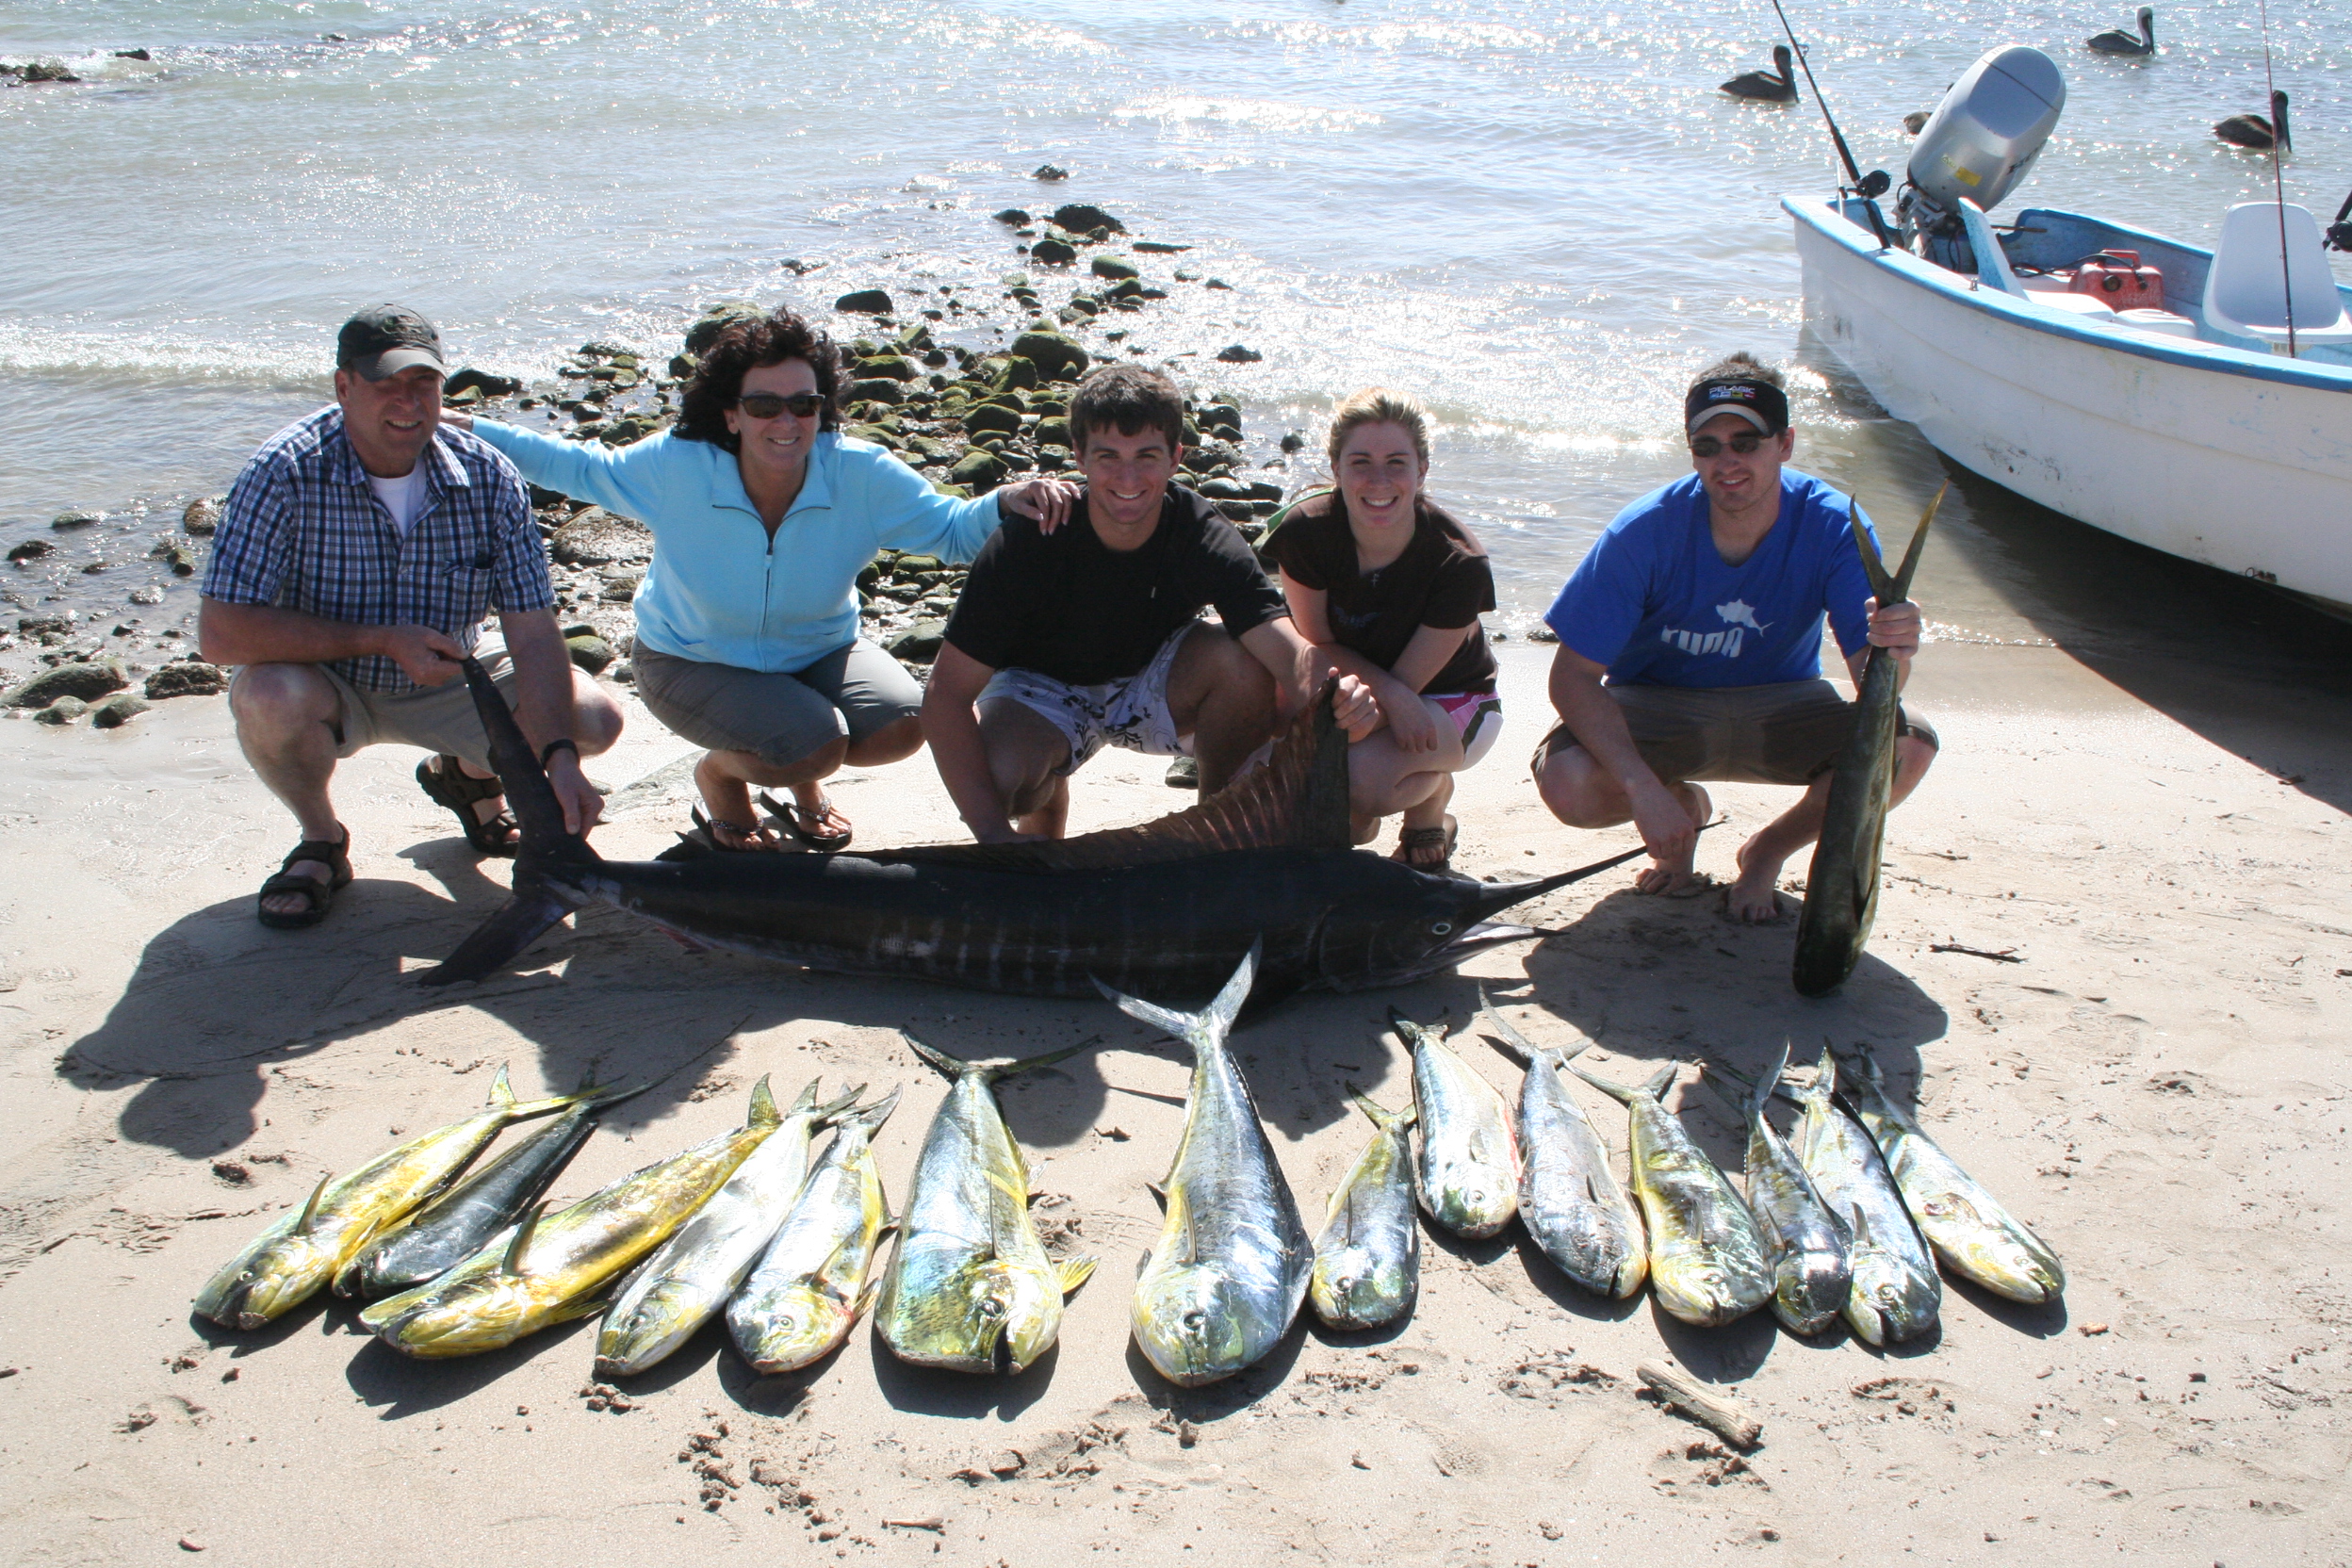 Fishing in Mexico - West Coast Mexico Insurance